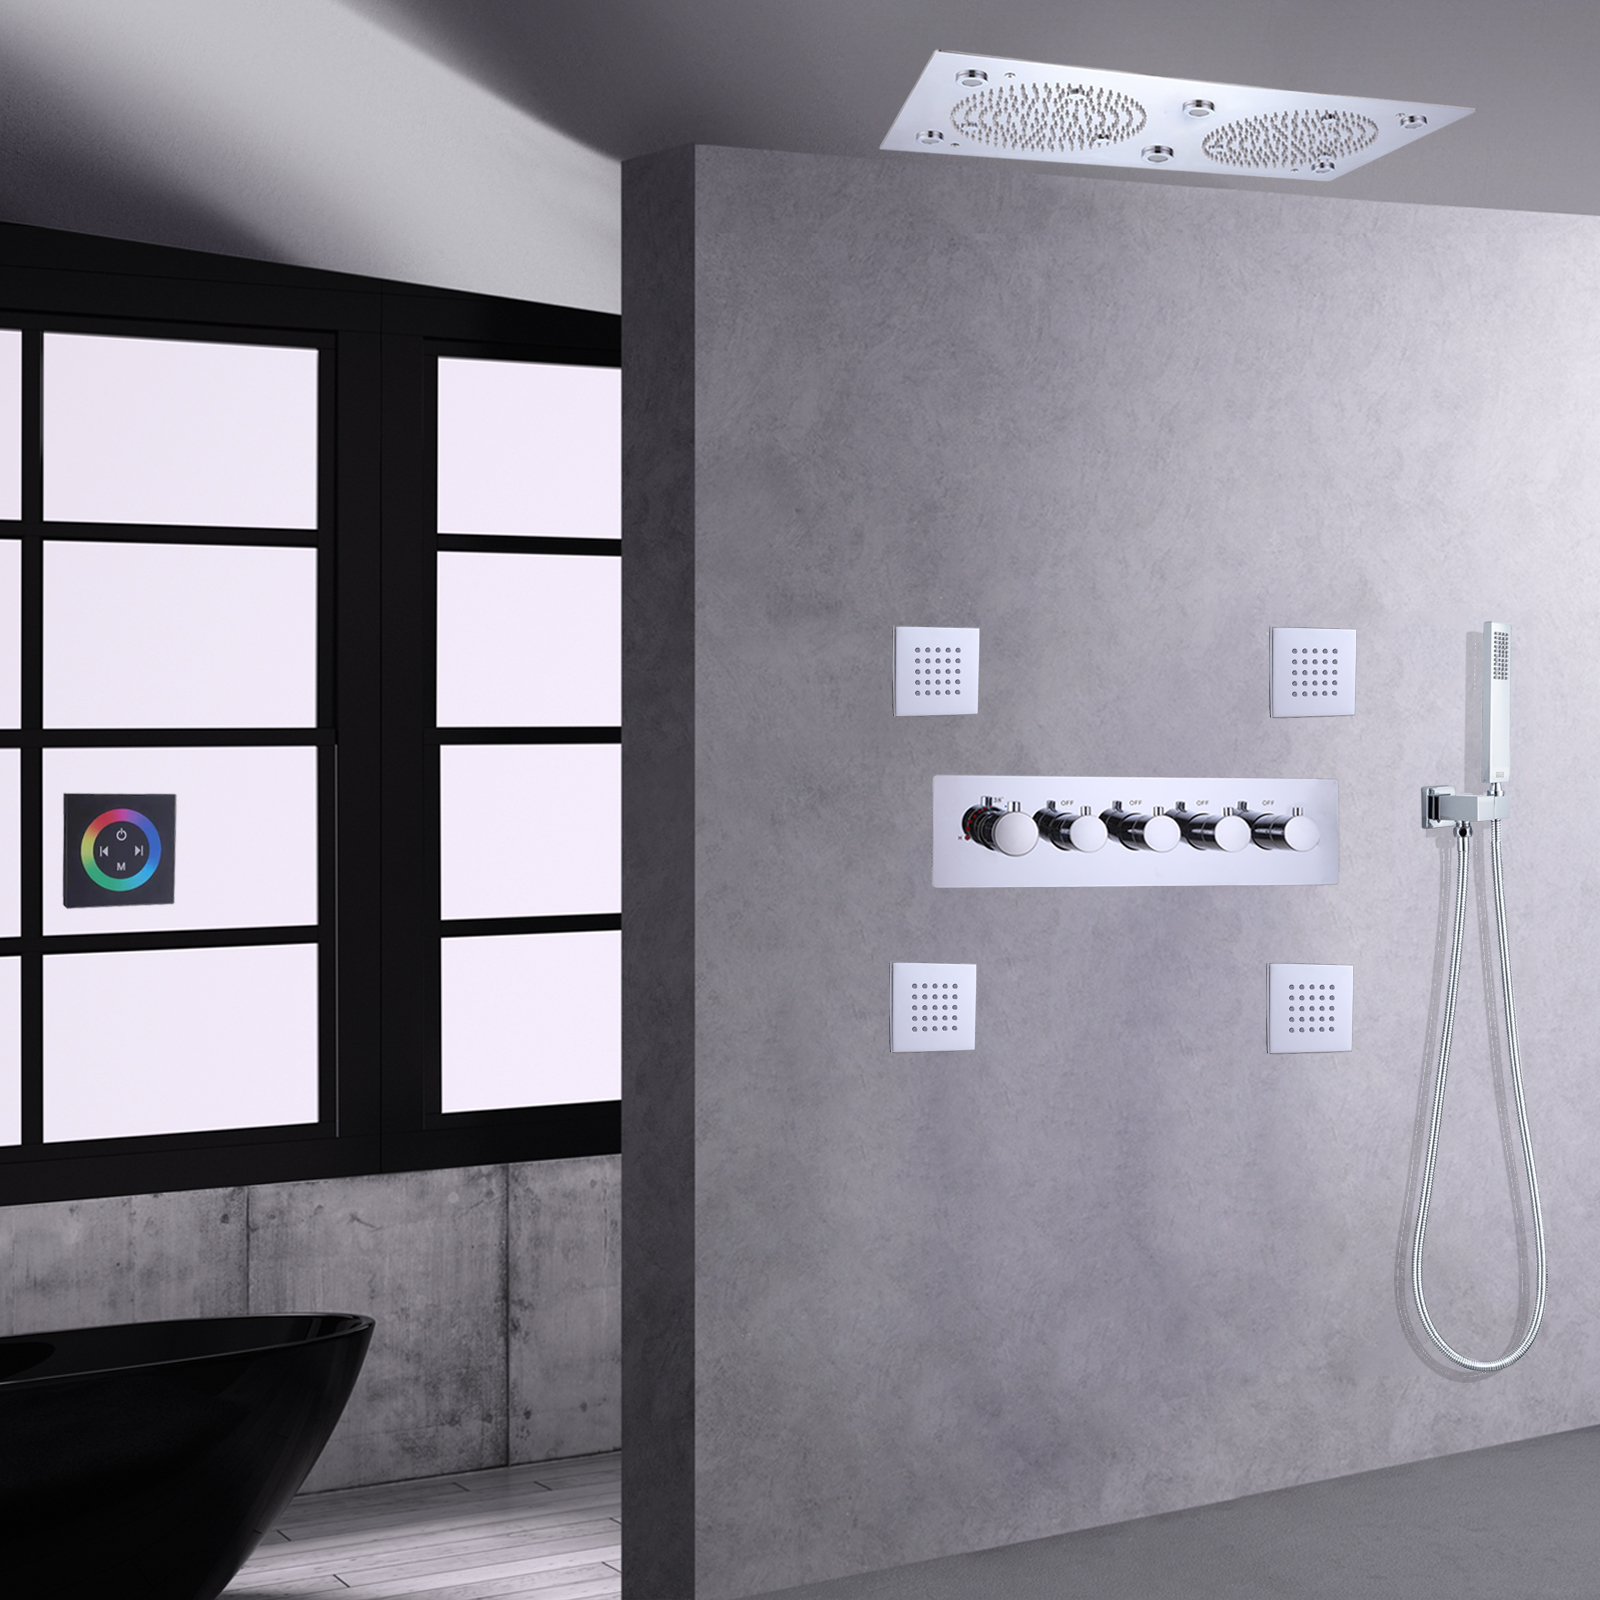 Chrome Polished Shower Faucet Bathroom LED Thermostatic Wall-mounted Rain Mist With Handheld Shower Arm